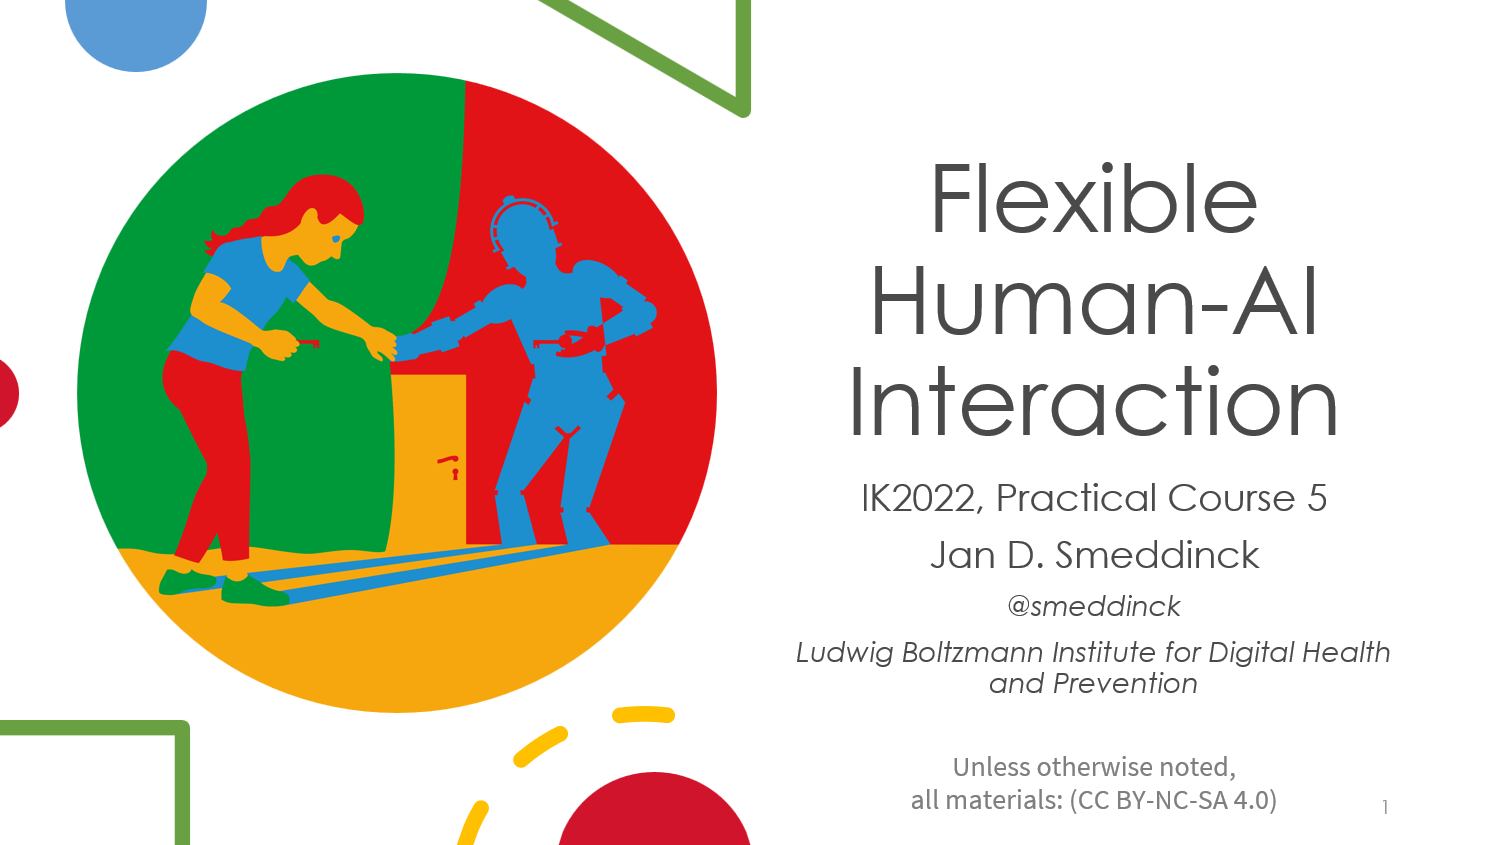 Header slide for the flexible human-ai interaction course at the Interdisciplinary College 2022.